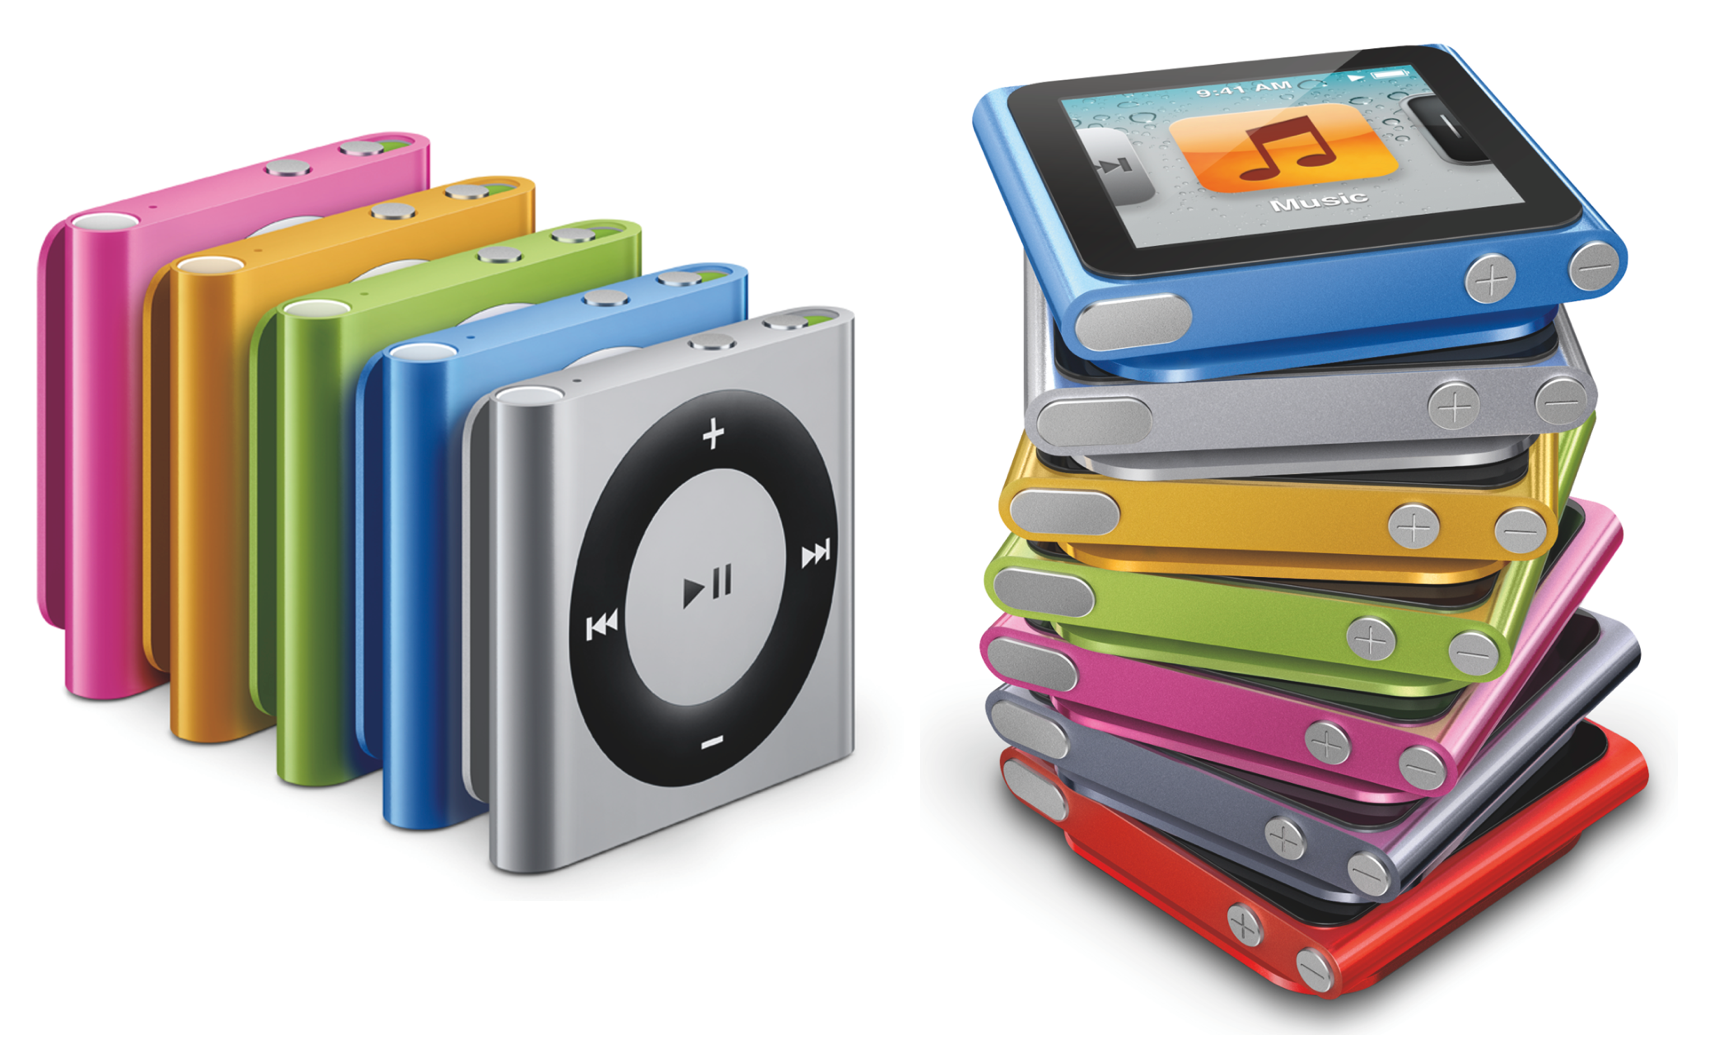 St Verzorger Ooit Apple's new iPods: Various new iPod touches, new iPod nano, tweaked iPod  shuffle - 9to5Mac